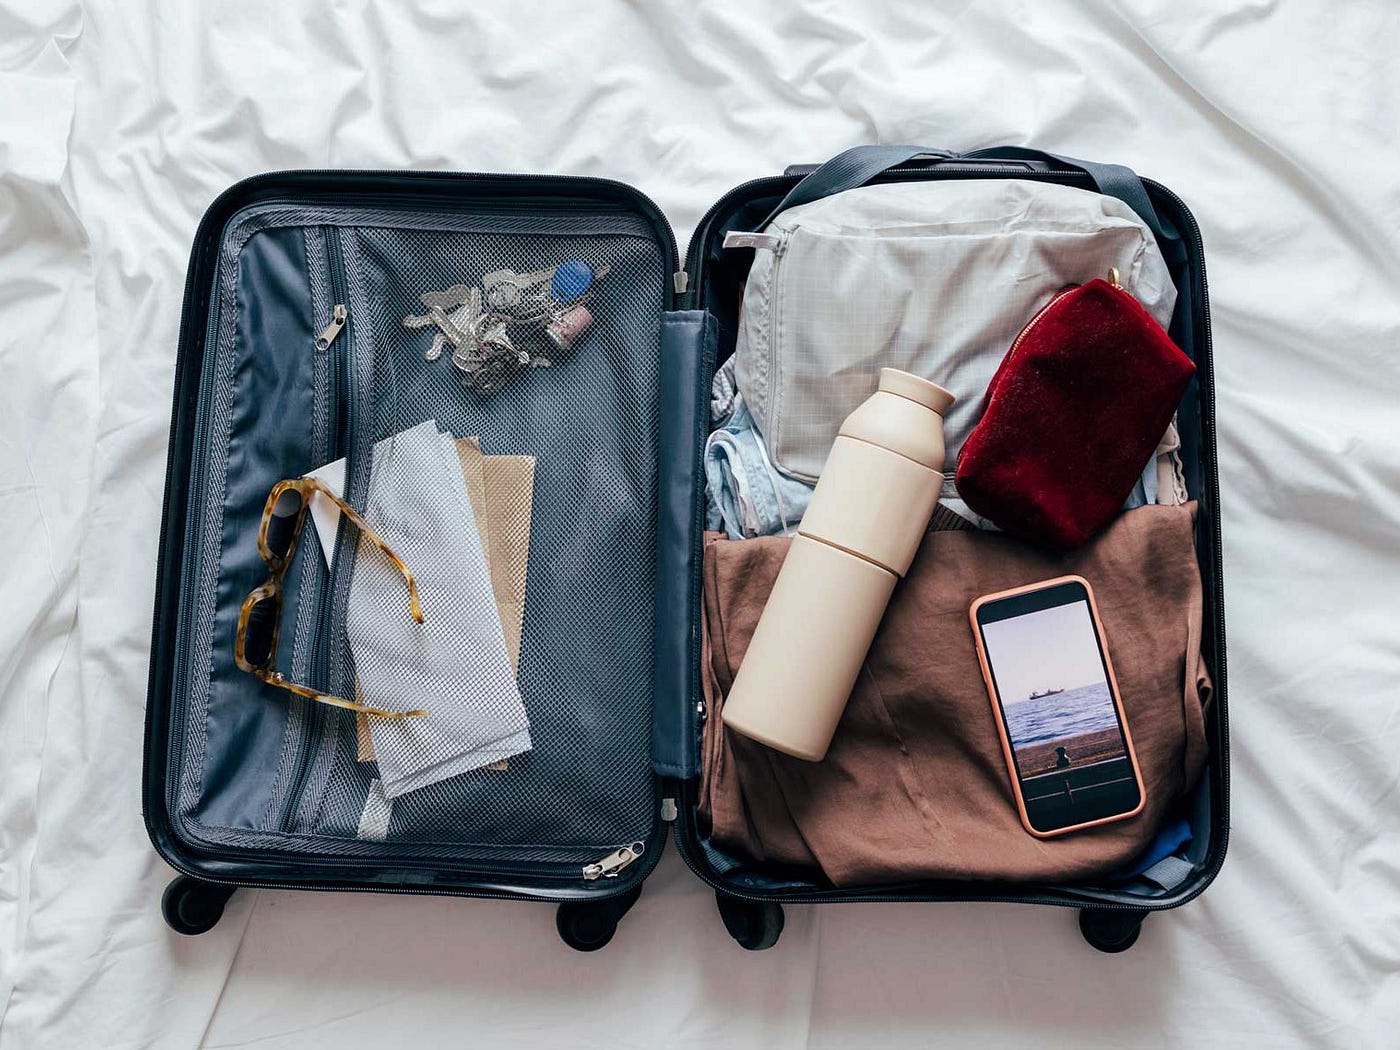 How to Pack Light for Traveling